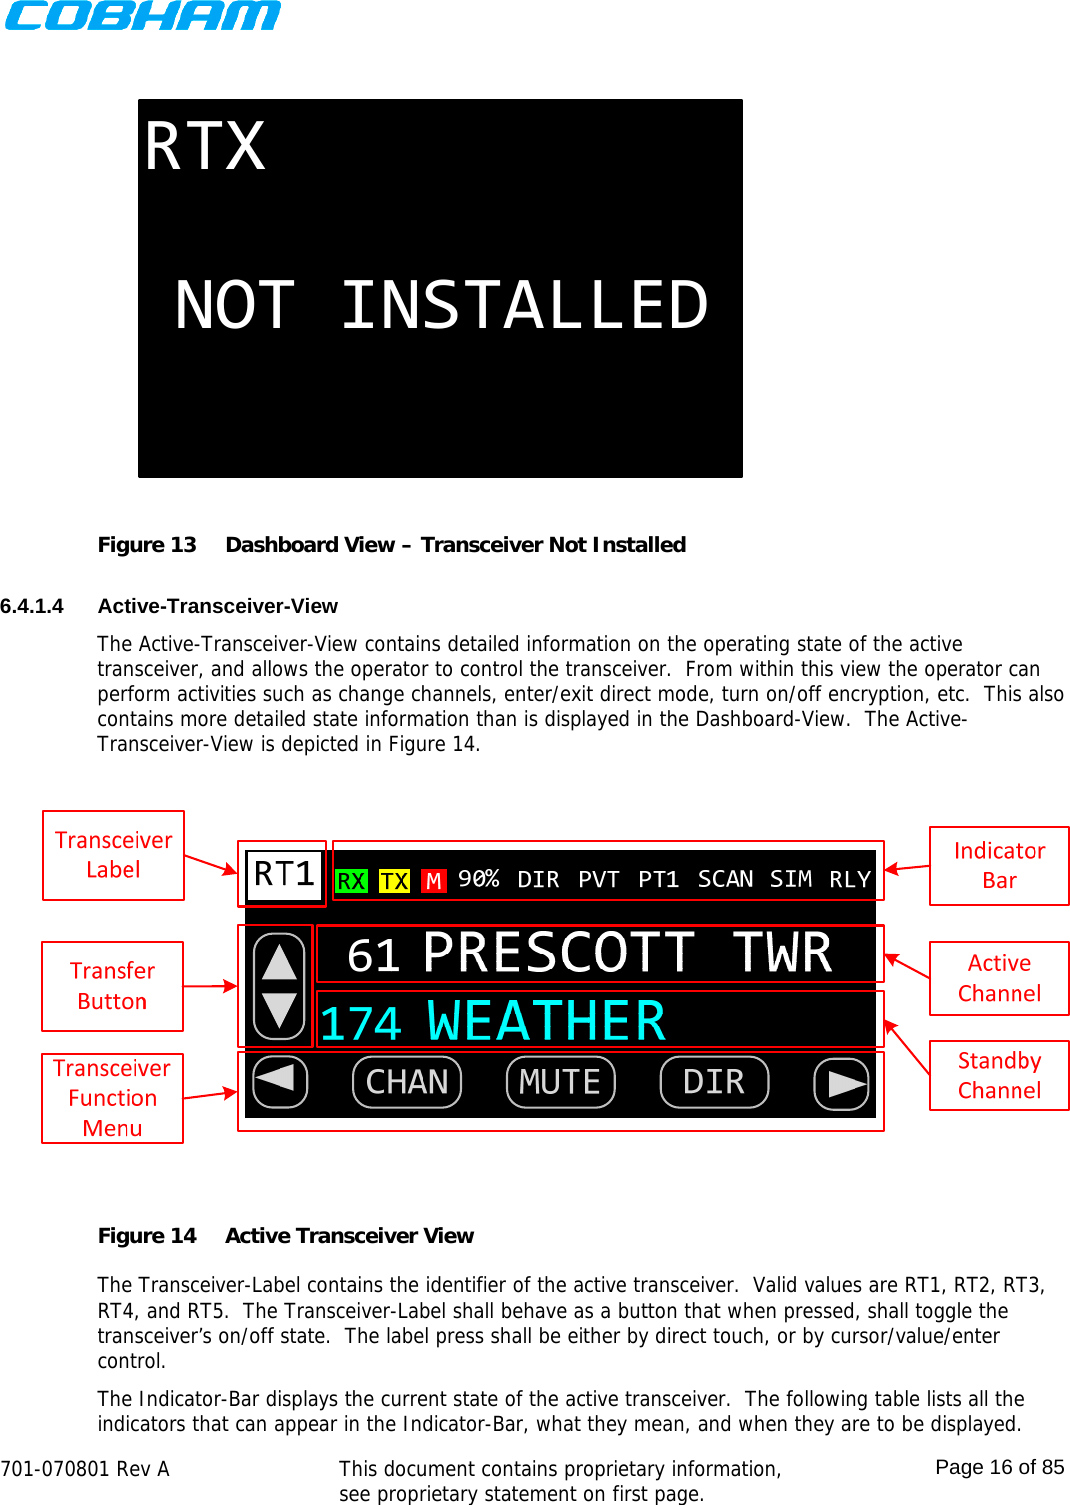    701-070801 Rev A   This document contains proprietary information, see proprietary statement on first page.  Page 16 of 85  RTXNOT INSTALLED Figure 13  Dashboard View – Transceiver Not Installed  6.4.1.4 Active-Transceiver-View The Active-Transceiver-View contains detailed information on the operating state of the active transceiver, and allows the operator to control the transceiver.  From within this view the operator can perform activities such as change channels, enter/exit direct mode, turn on/off encryption, etc.  This also contains more detailed state information than is displayed in the Dashboard-View.  The Active-Transceiver-View is depicted in Figure 14.  Figure 14  Active Transceiver View  The Transceiver-Label contains the identifier of the active transceiver.  Valid values are RT1, RT2, RT3, RT4, and RT5.  The Transceiver-Label shall behave as a button that when pressed, shall toggle the transceiver’s on/off state.  The label press shall be either by direct touch, or by cursor/value/enter control. The Indicator-Bar displays the current state of the active transceiver.  The following table lists all the indicators that can appear in the Indicator-Bar, what they mean, and when they are to be displayed. 